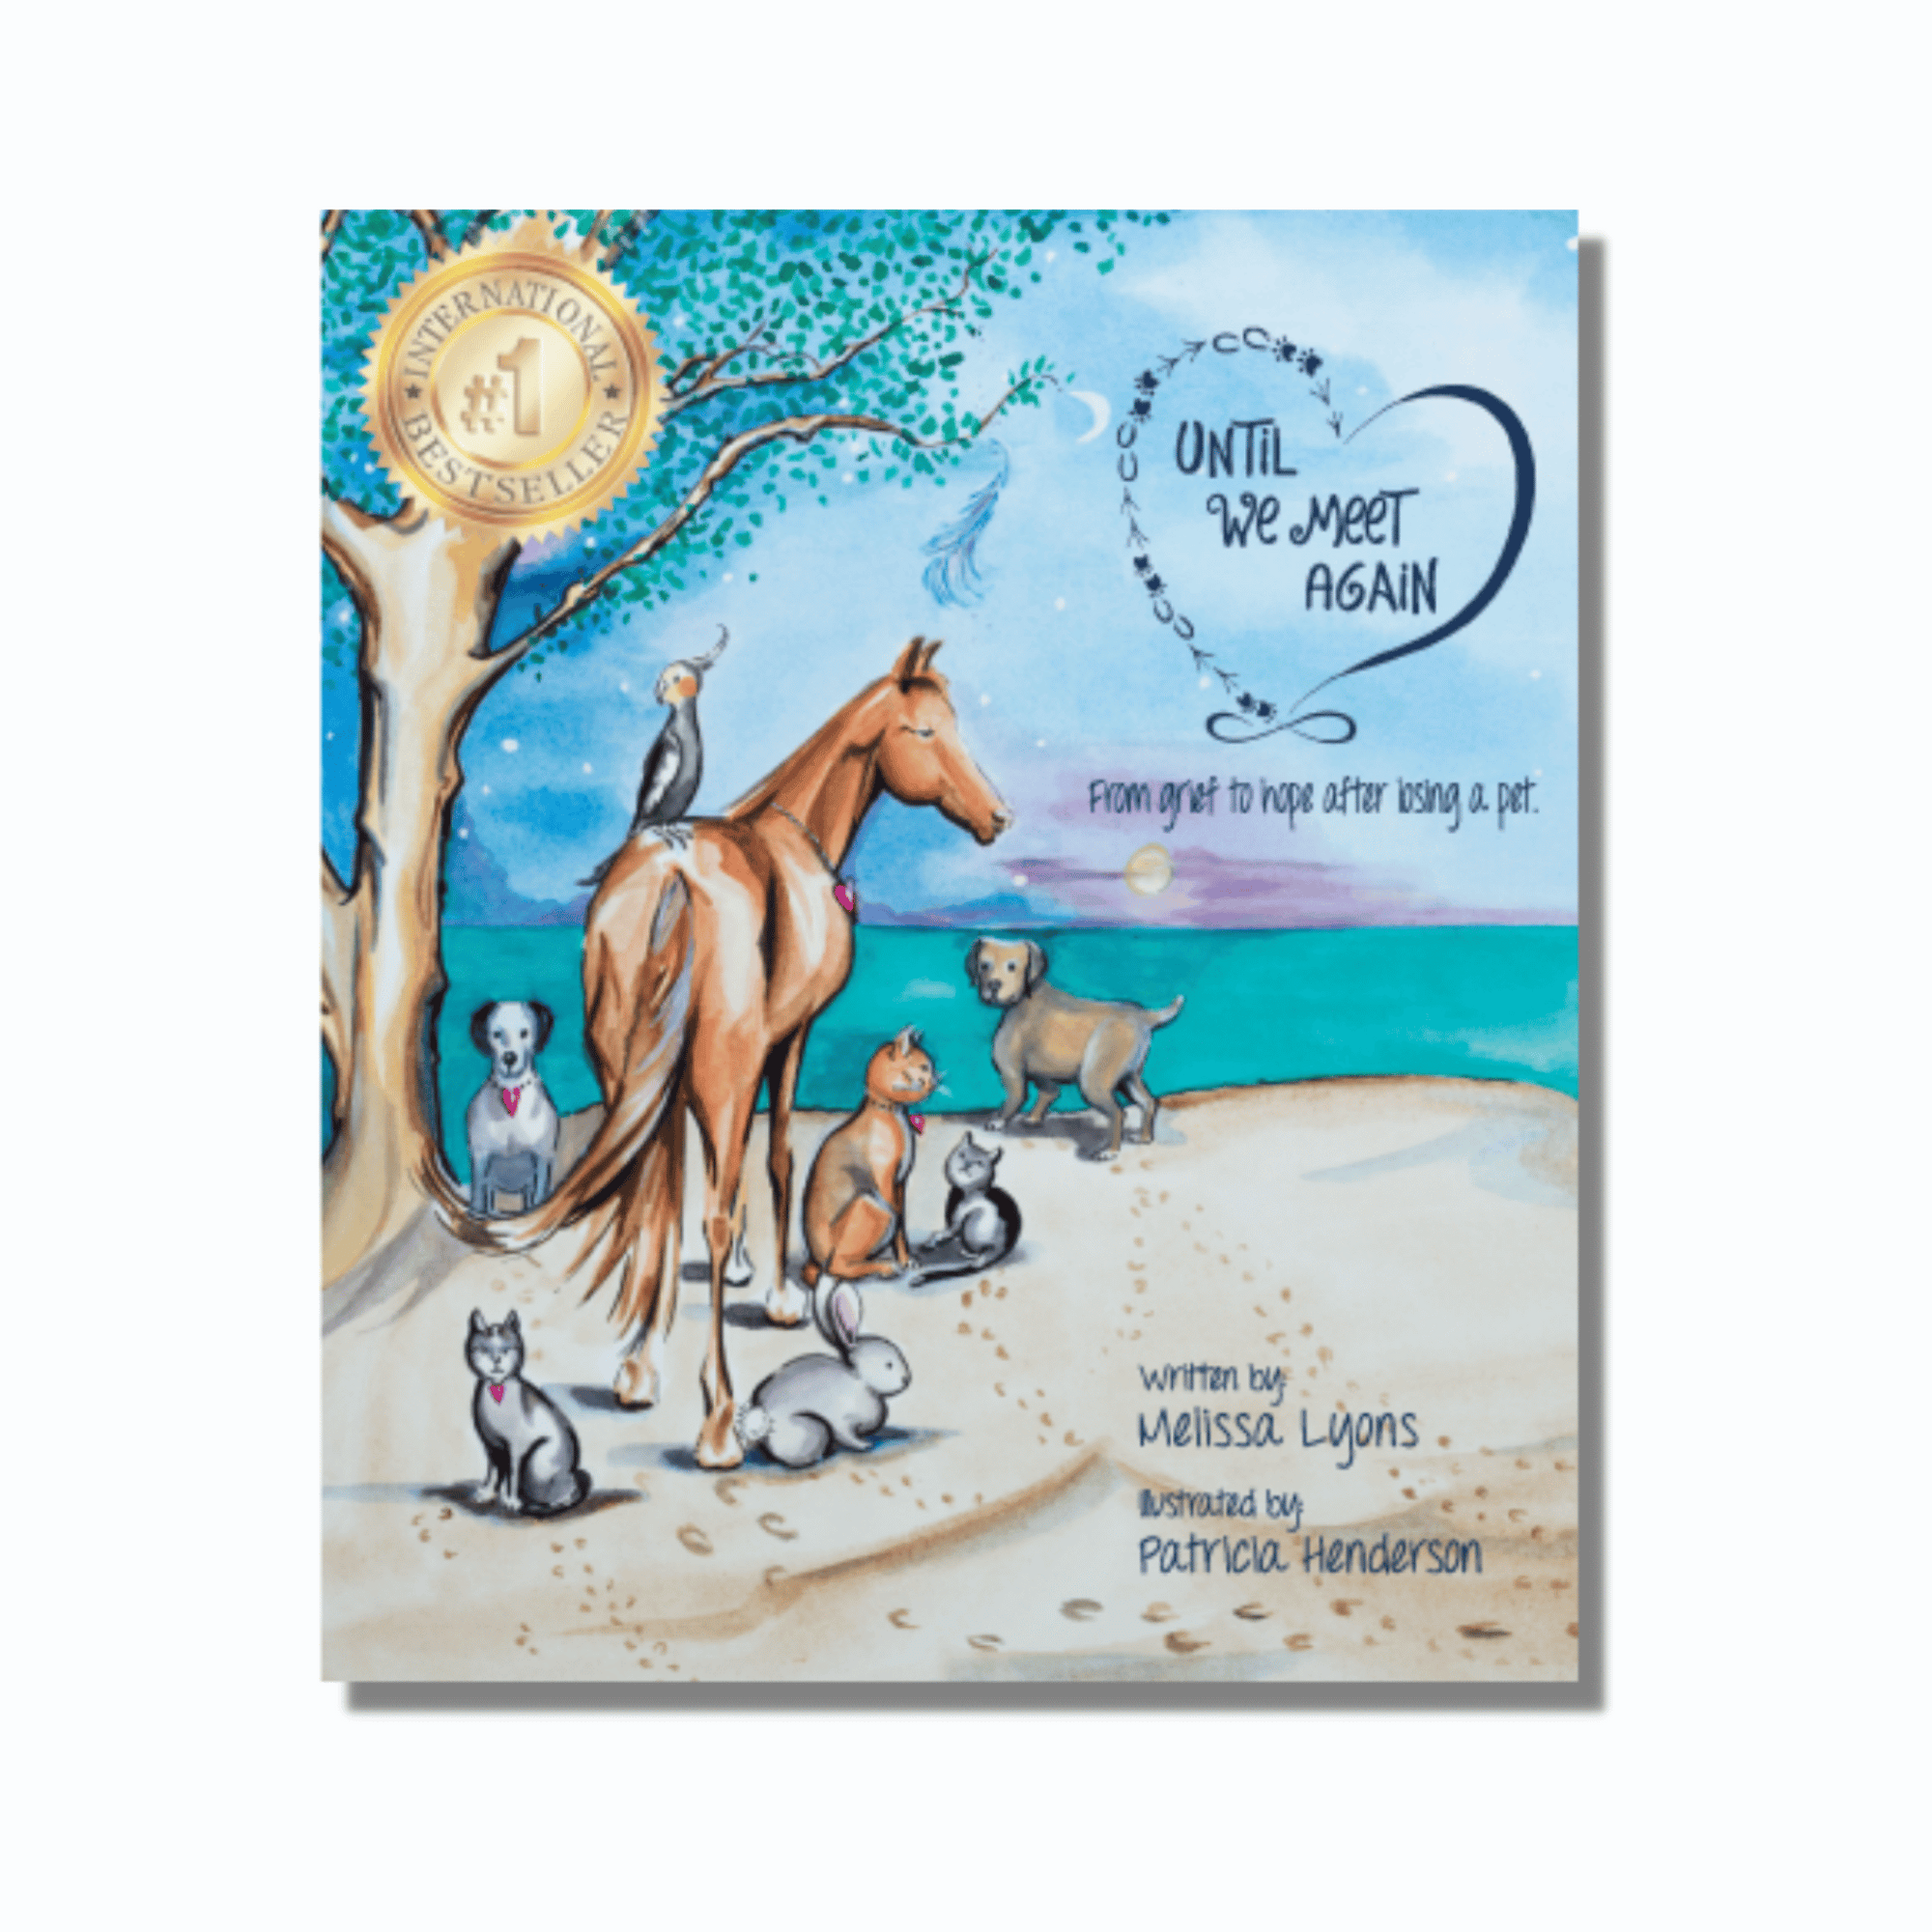 Pet Loss Book "Until We Meet Again: From grief to hope after losing a pet"